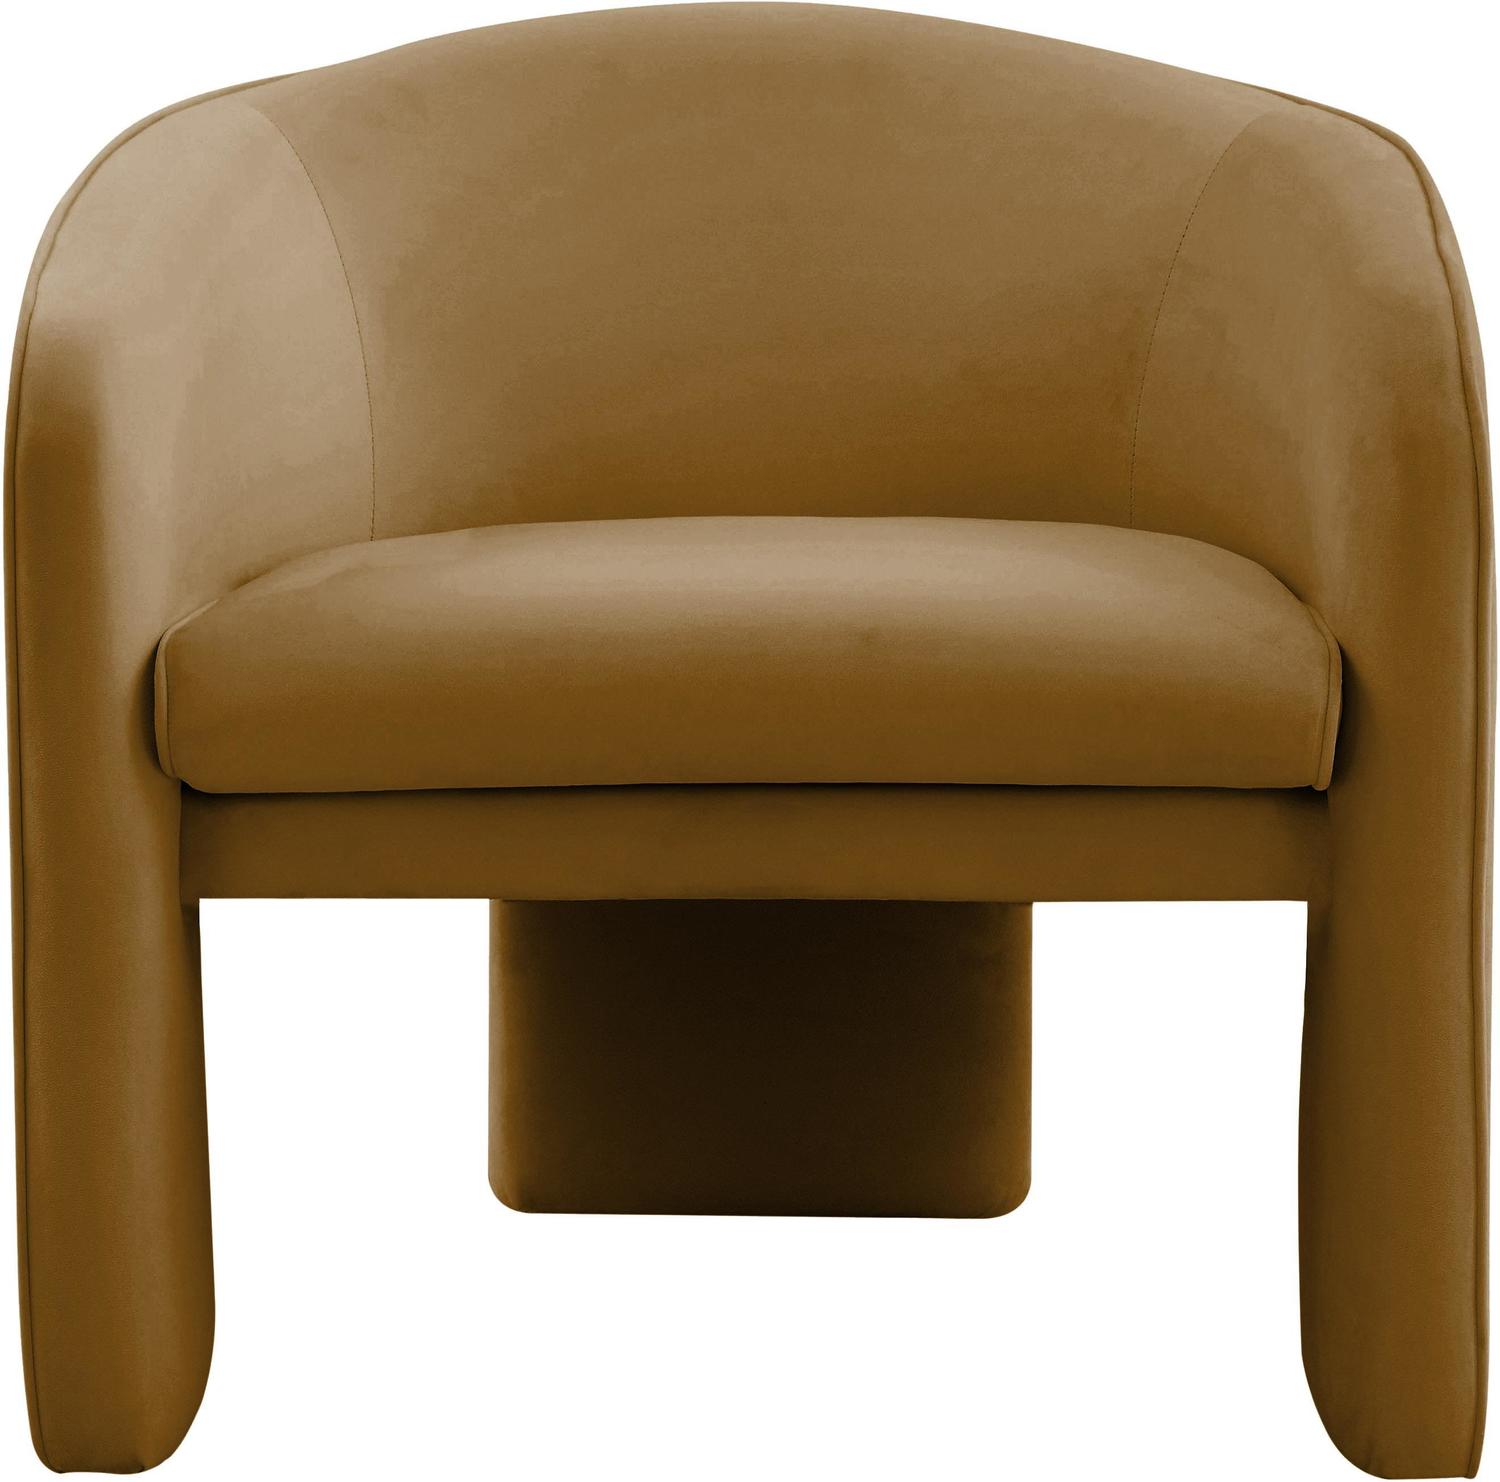 contemporary chair with ottoman Tov Furniture Accent Chairs Cognac